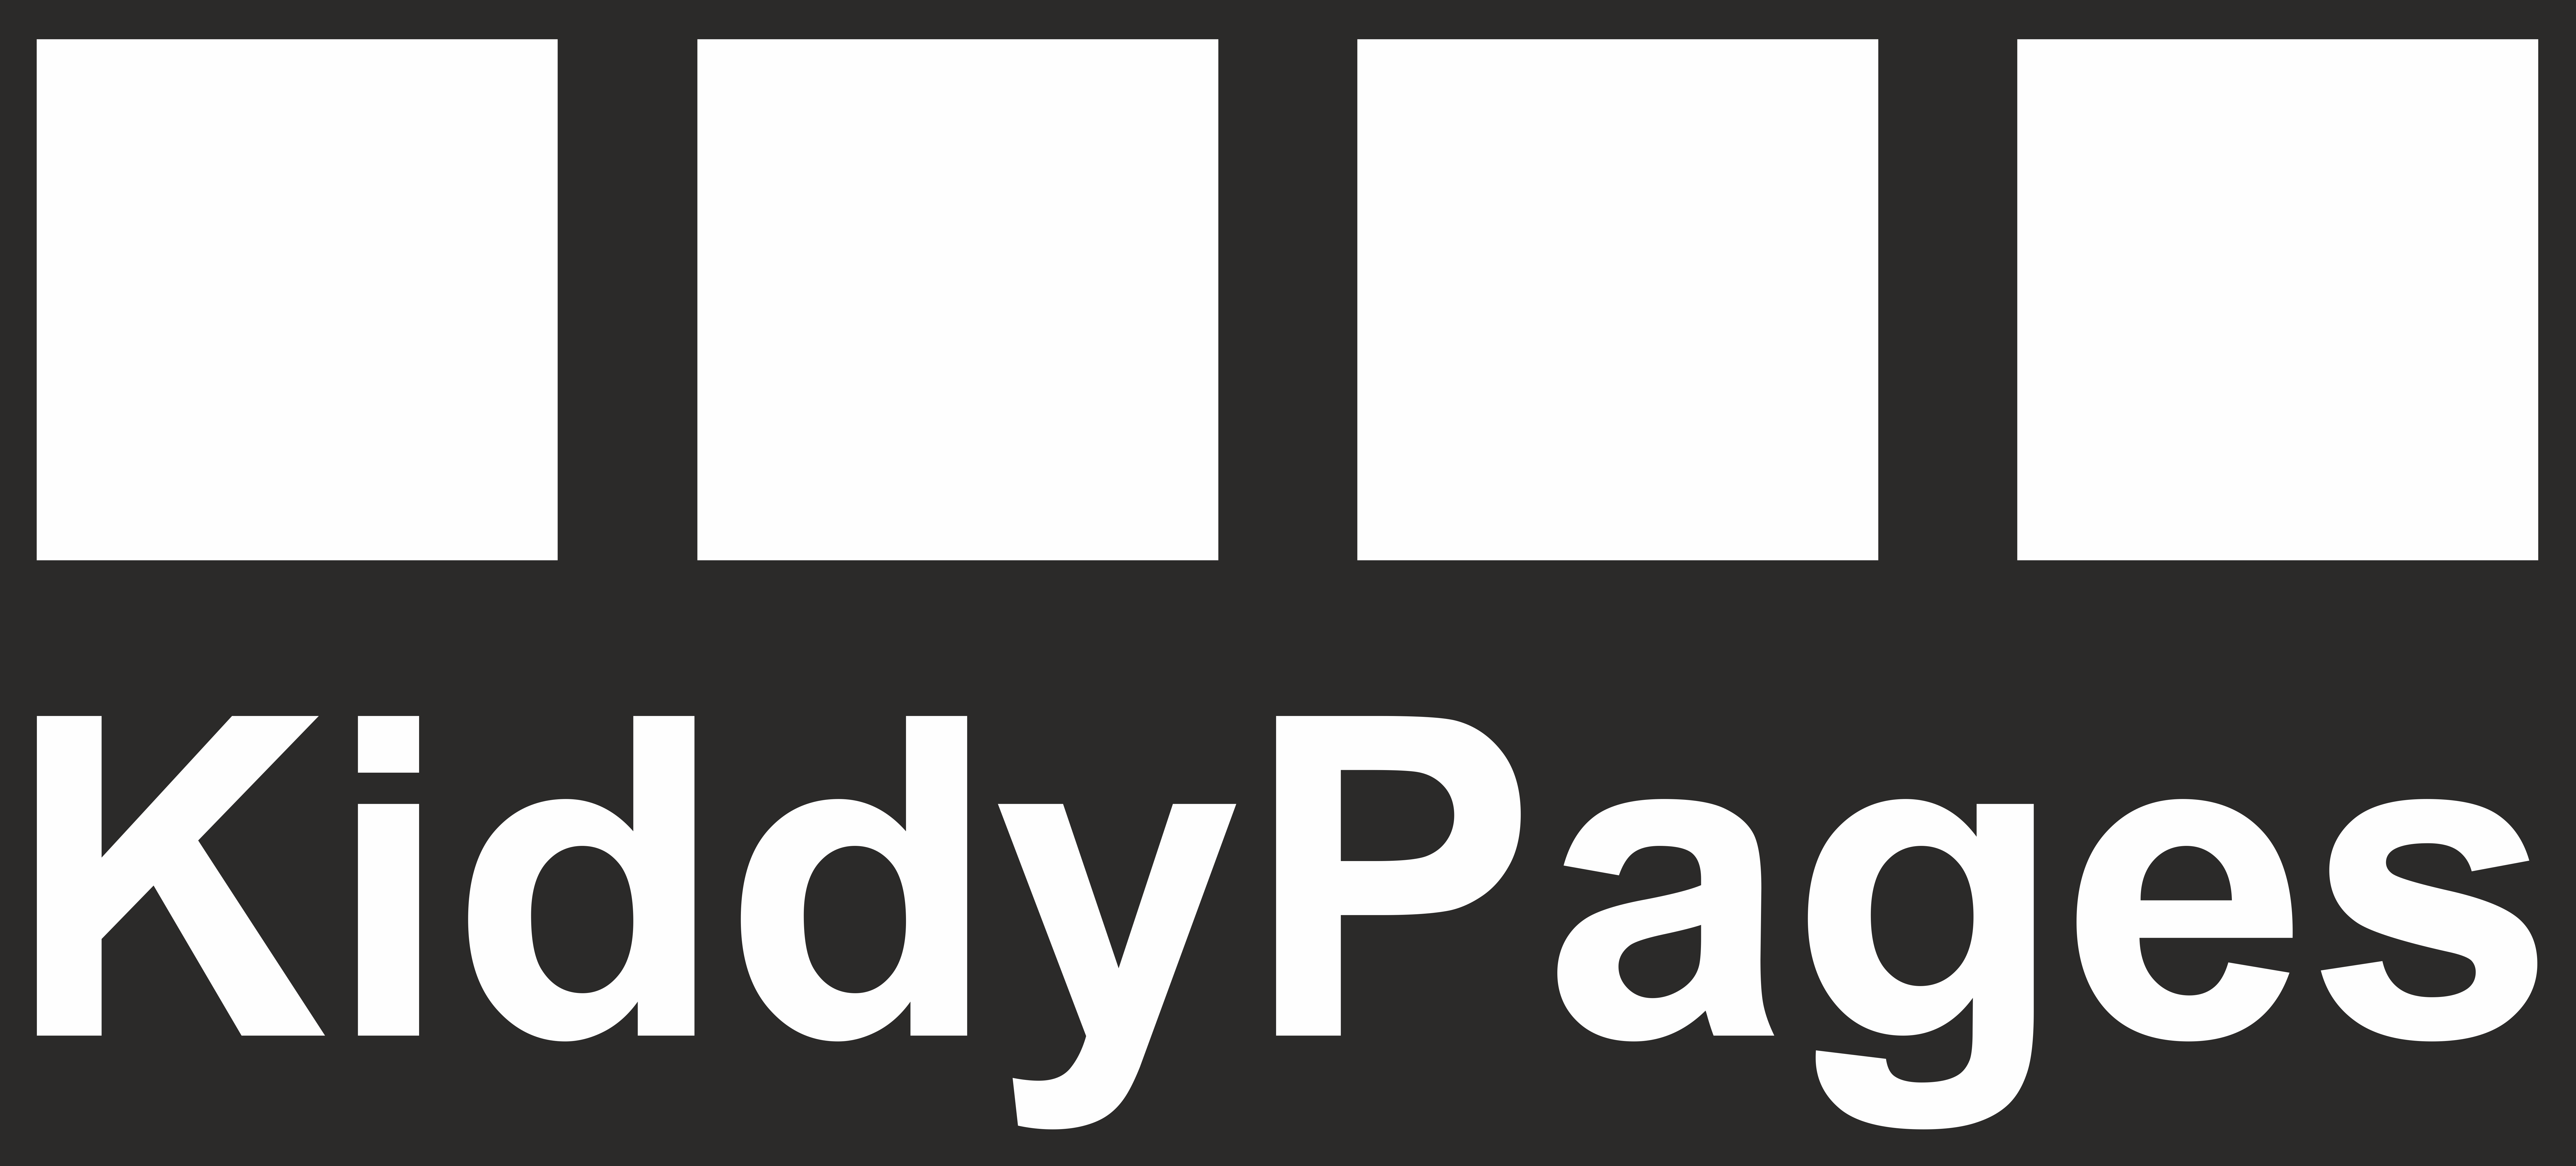 kiddypages